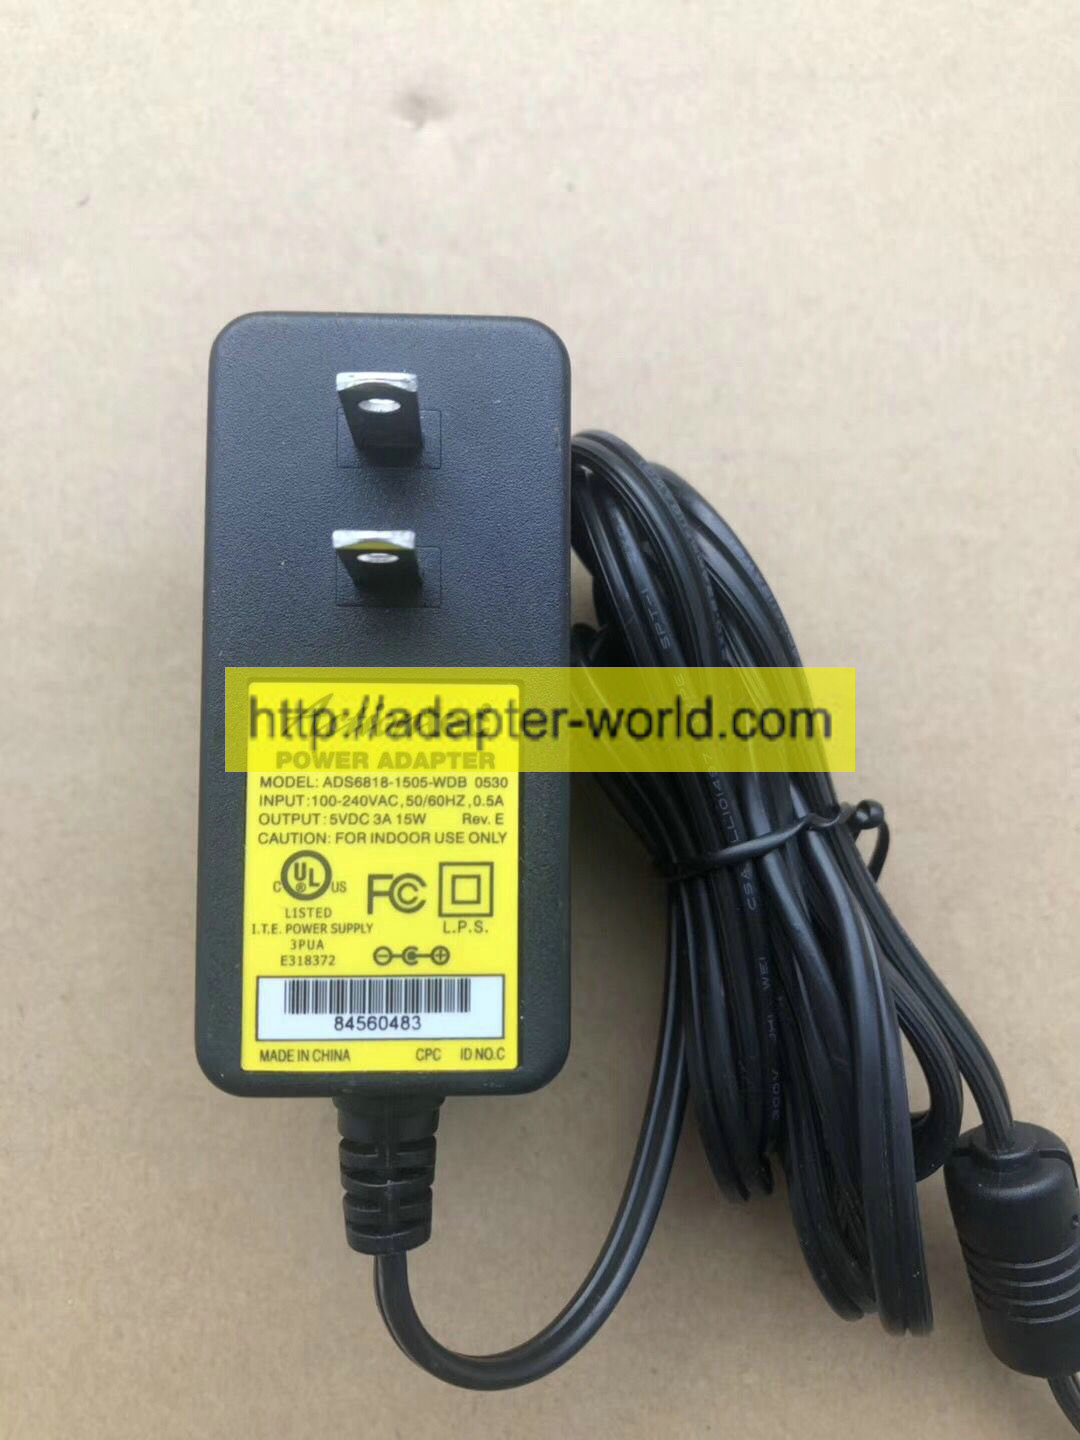 *100% Brand NEW* Actiontec 5VDC 3A 15W ADS6818-1505-WDB 0530 Switching Power Adapter Free shipping!